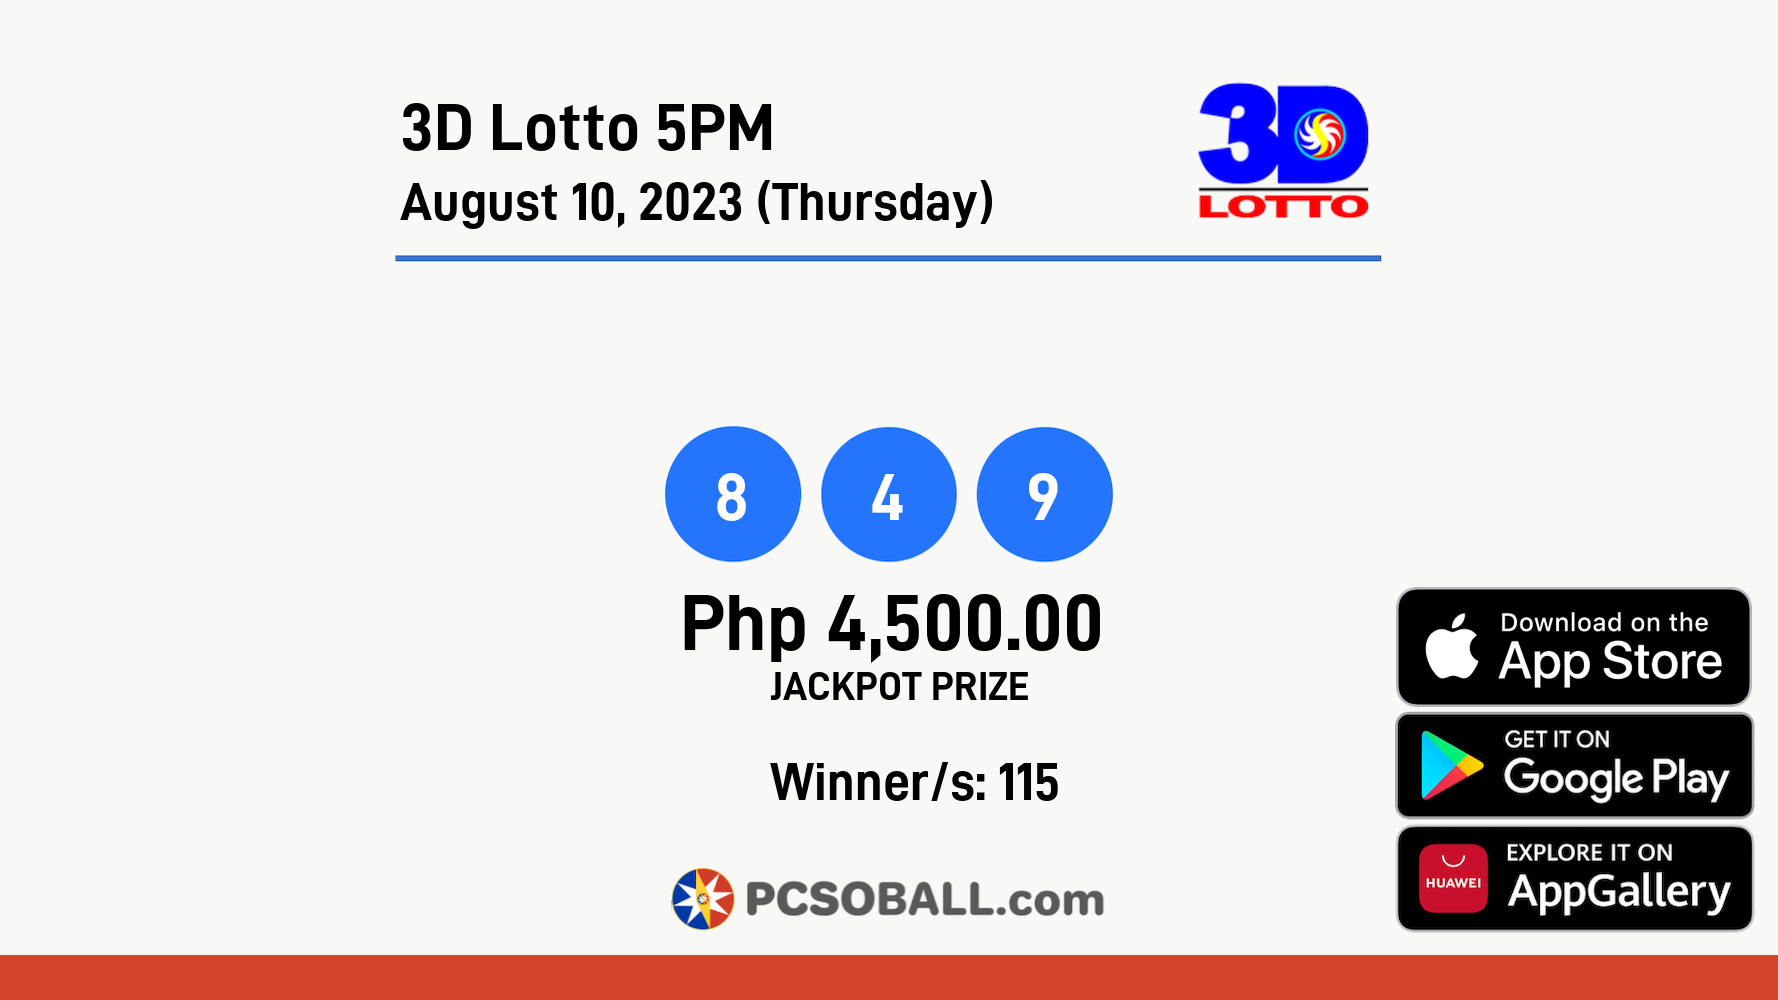 3D Lotto 5PM August 10, 2023 (Thursday) Result